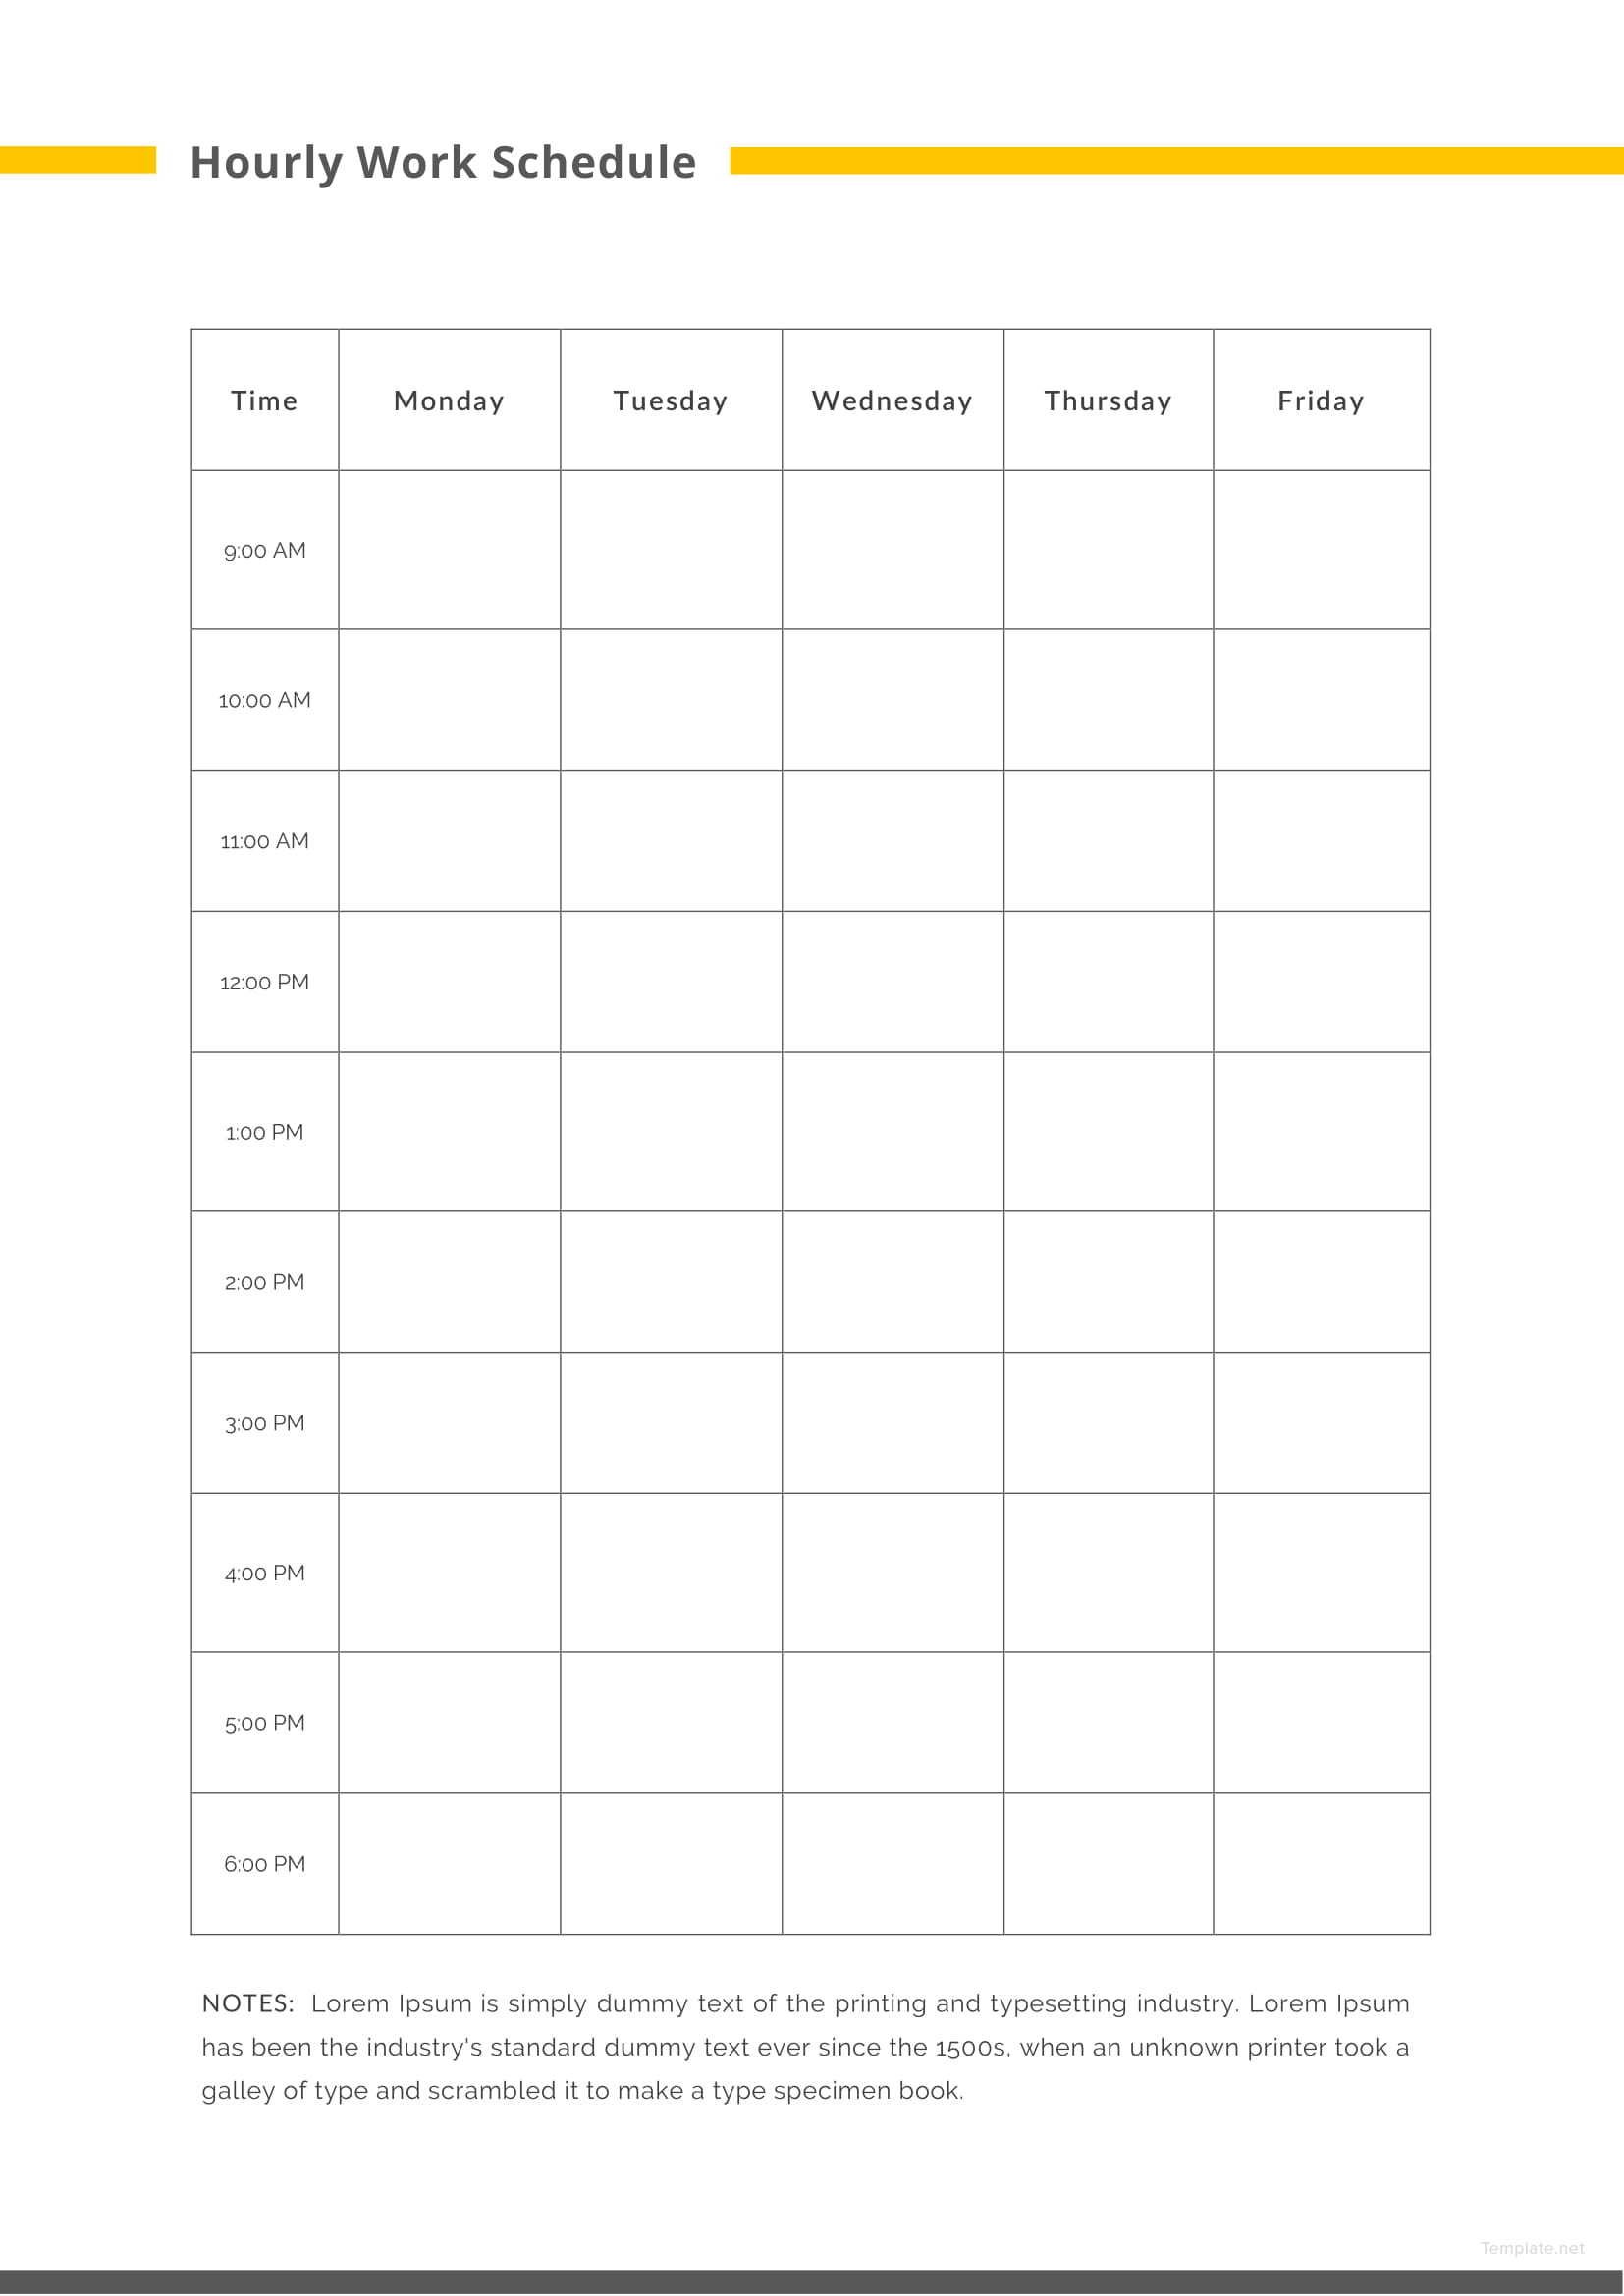 Hourly Work Schedule Template in Microsoft Word